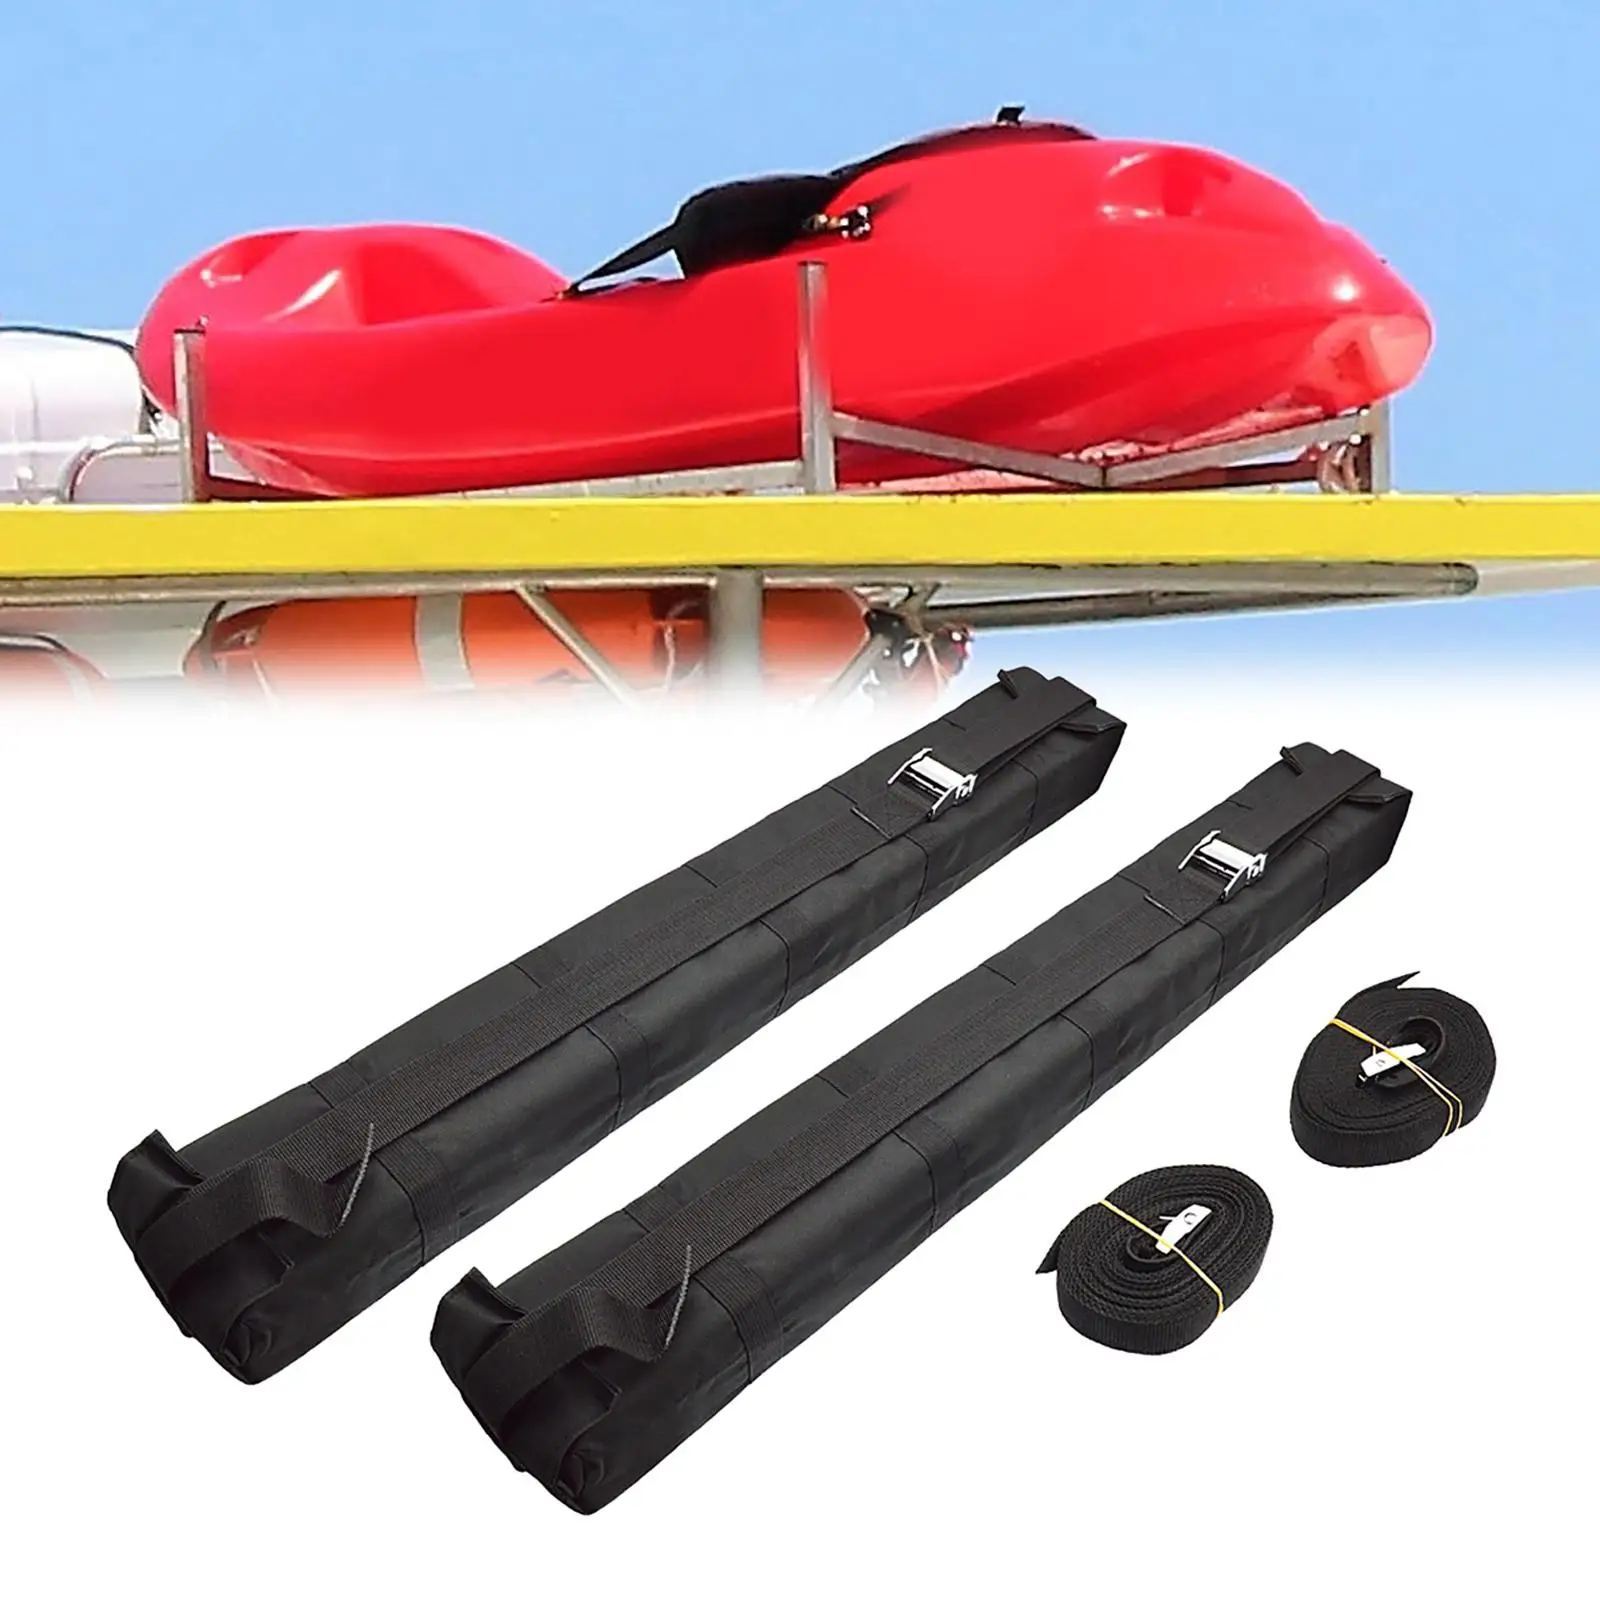 Roof Racks Universal Car Soft Roof Bars Kayak Roof Rack Durable Oxford Cloth Roof Rack Pad Carrier Heavy Duty Tie Down Straps